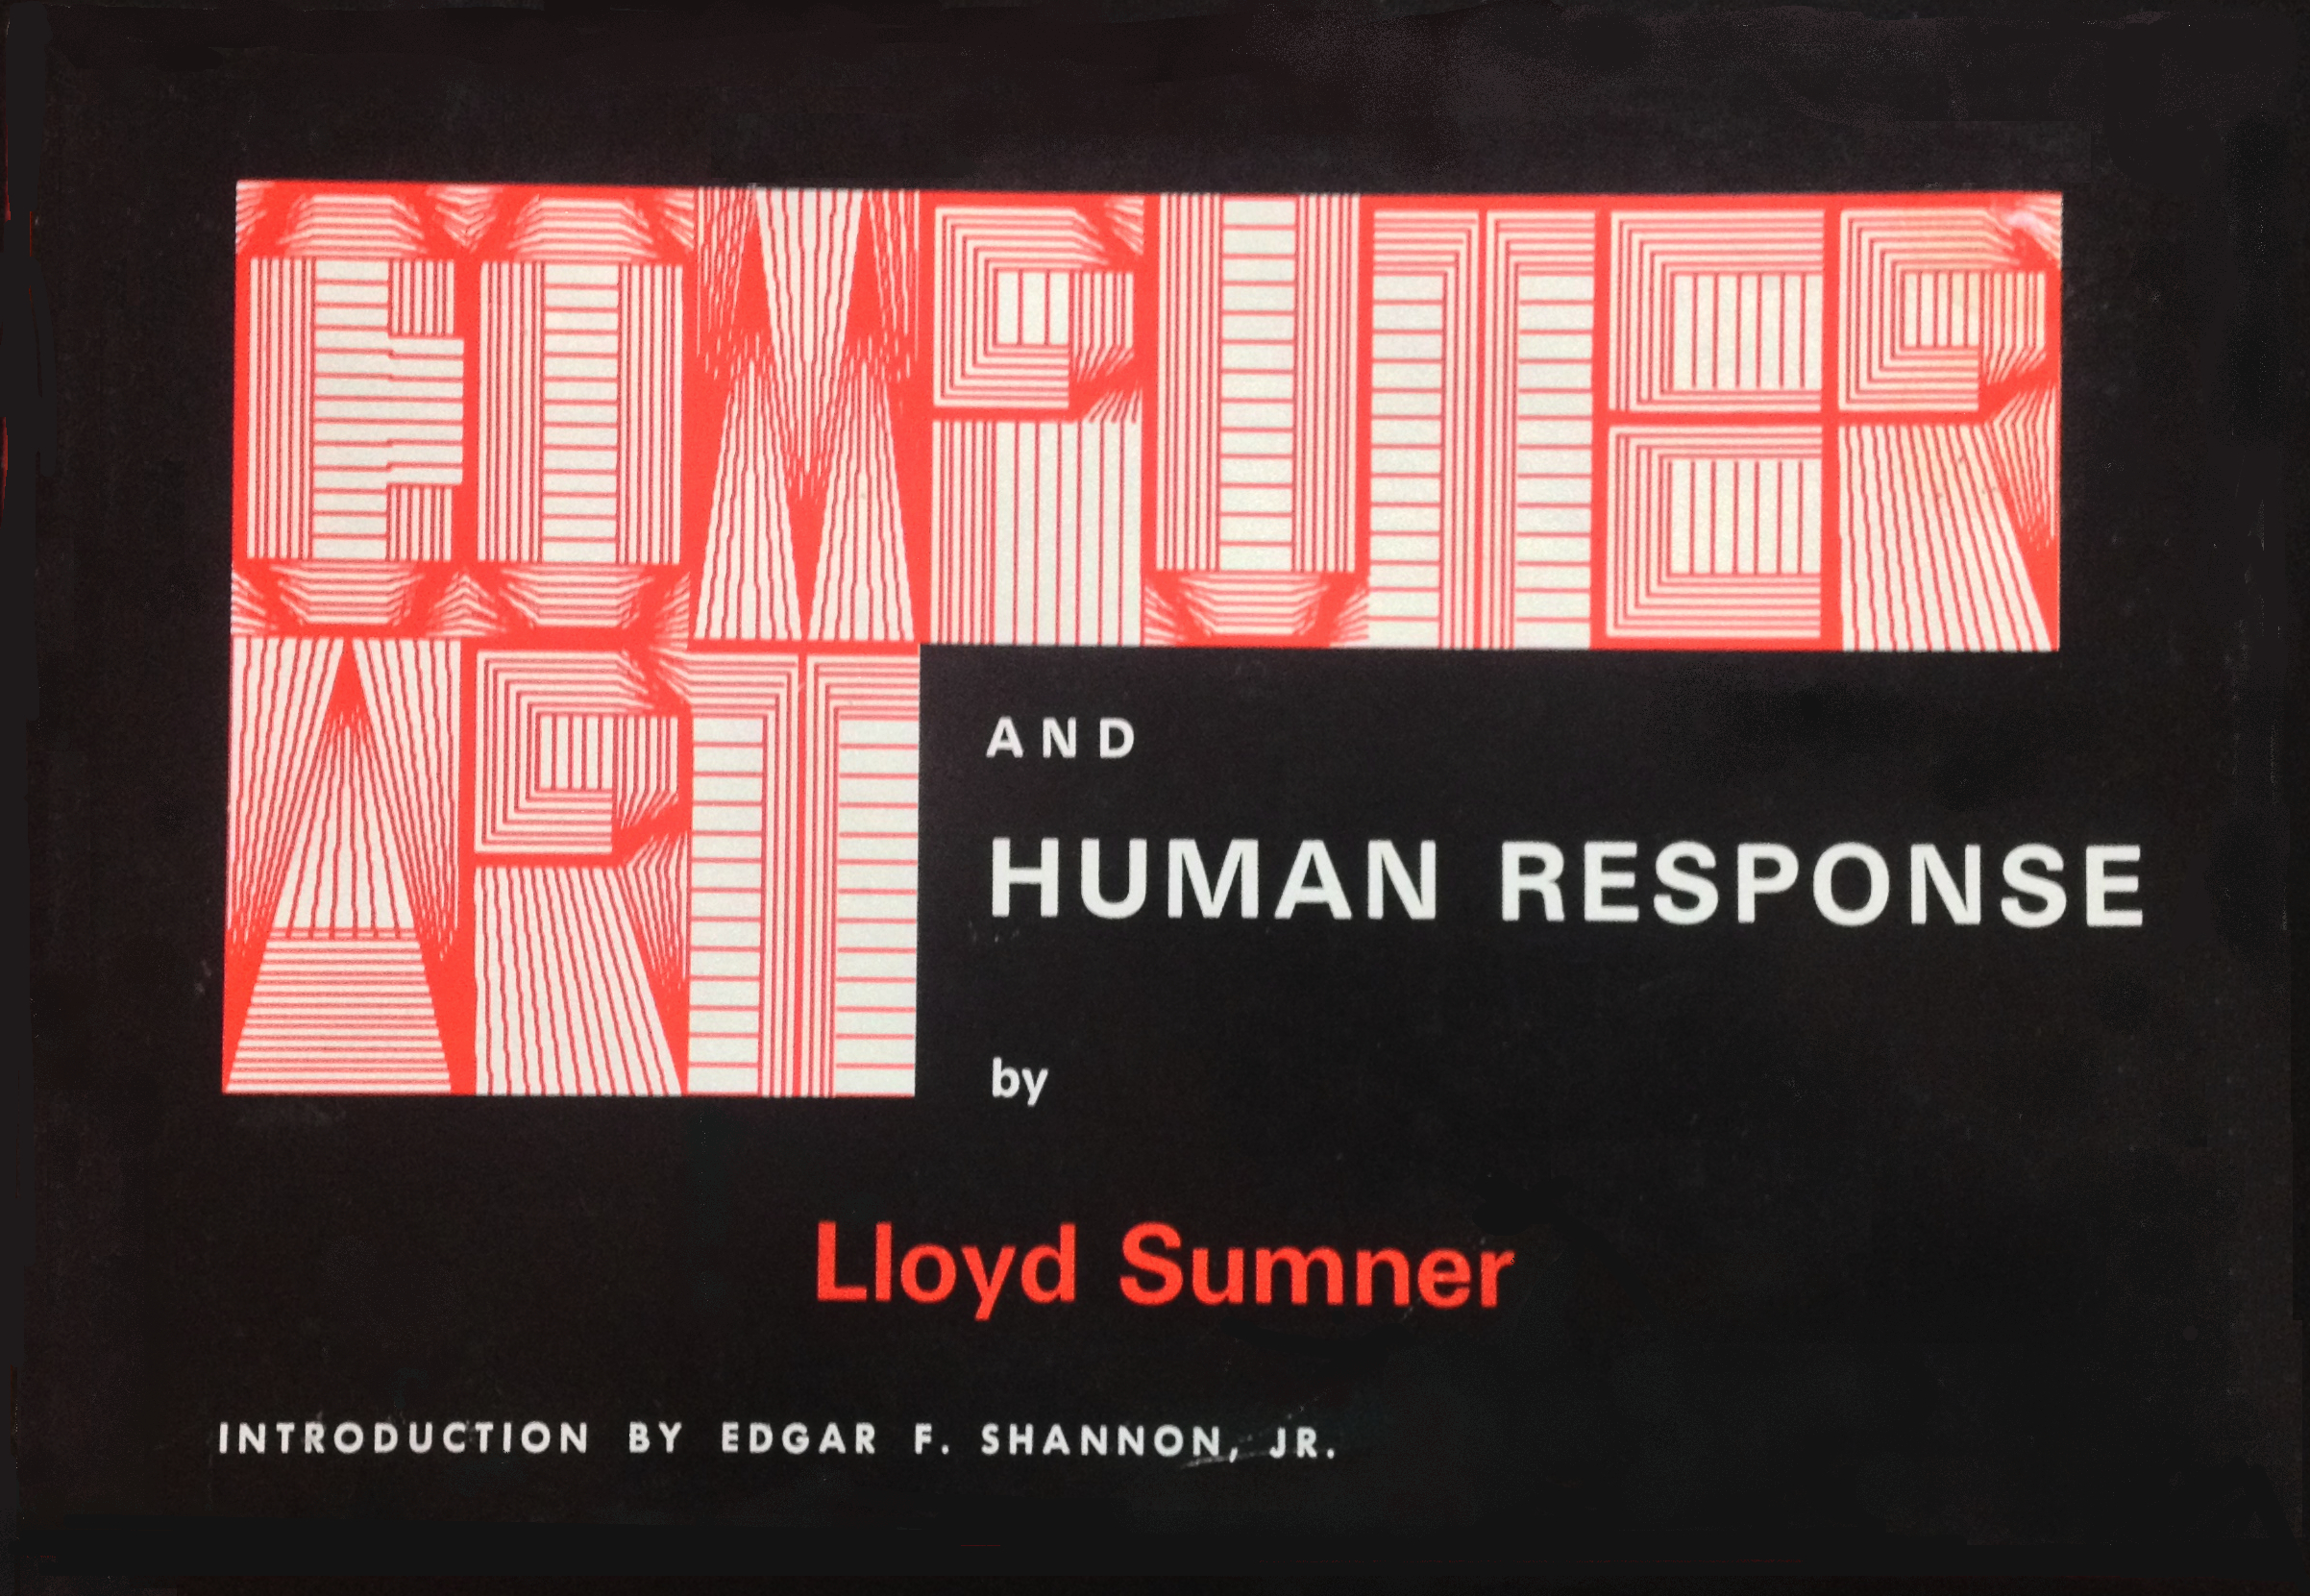 Cover of Computer Art and Human Response by Lloyd Sumner.